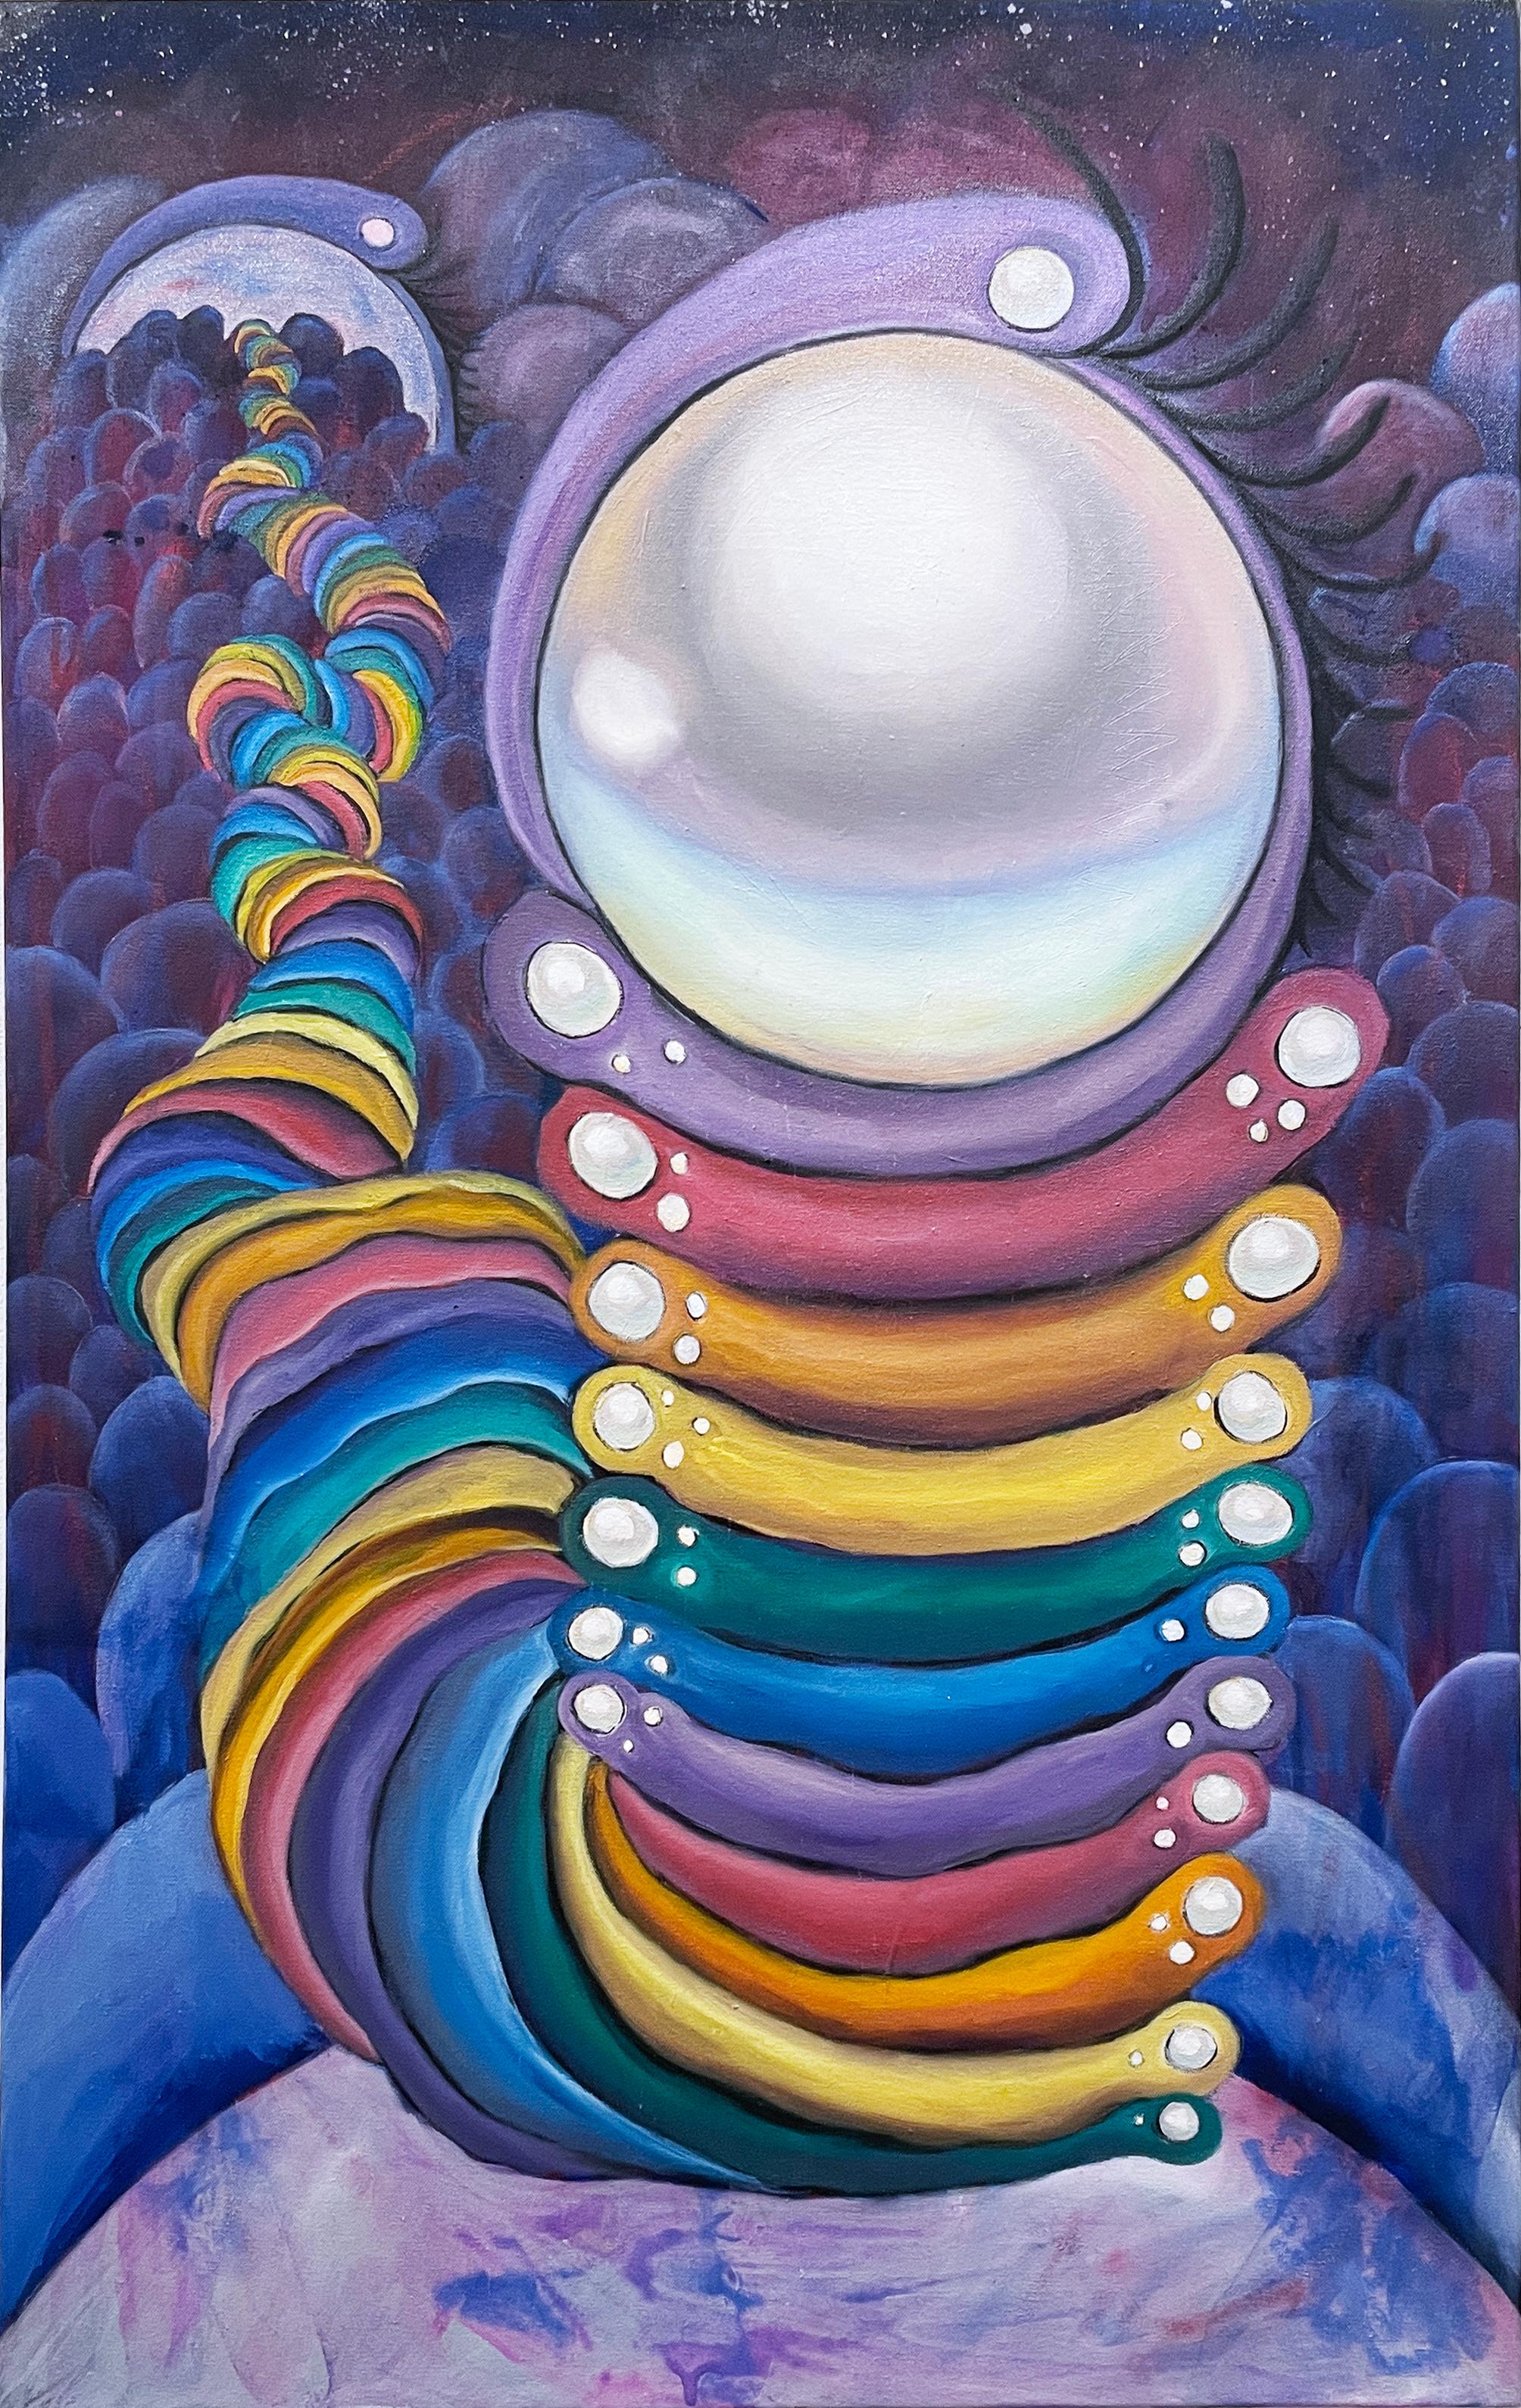 Eternal Pearl, 2020, surreal abstract 38x24 oil & acrylic painting, rainbow - Painting by Loren Abbate